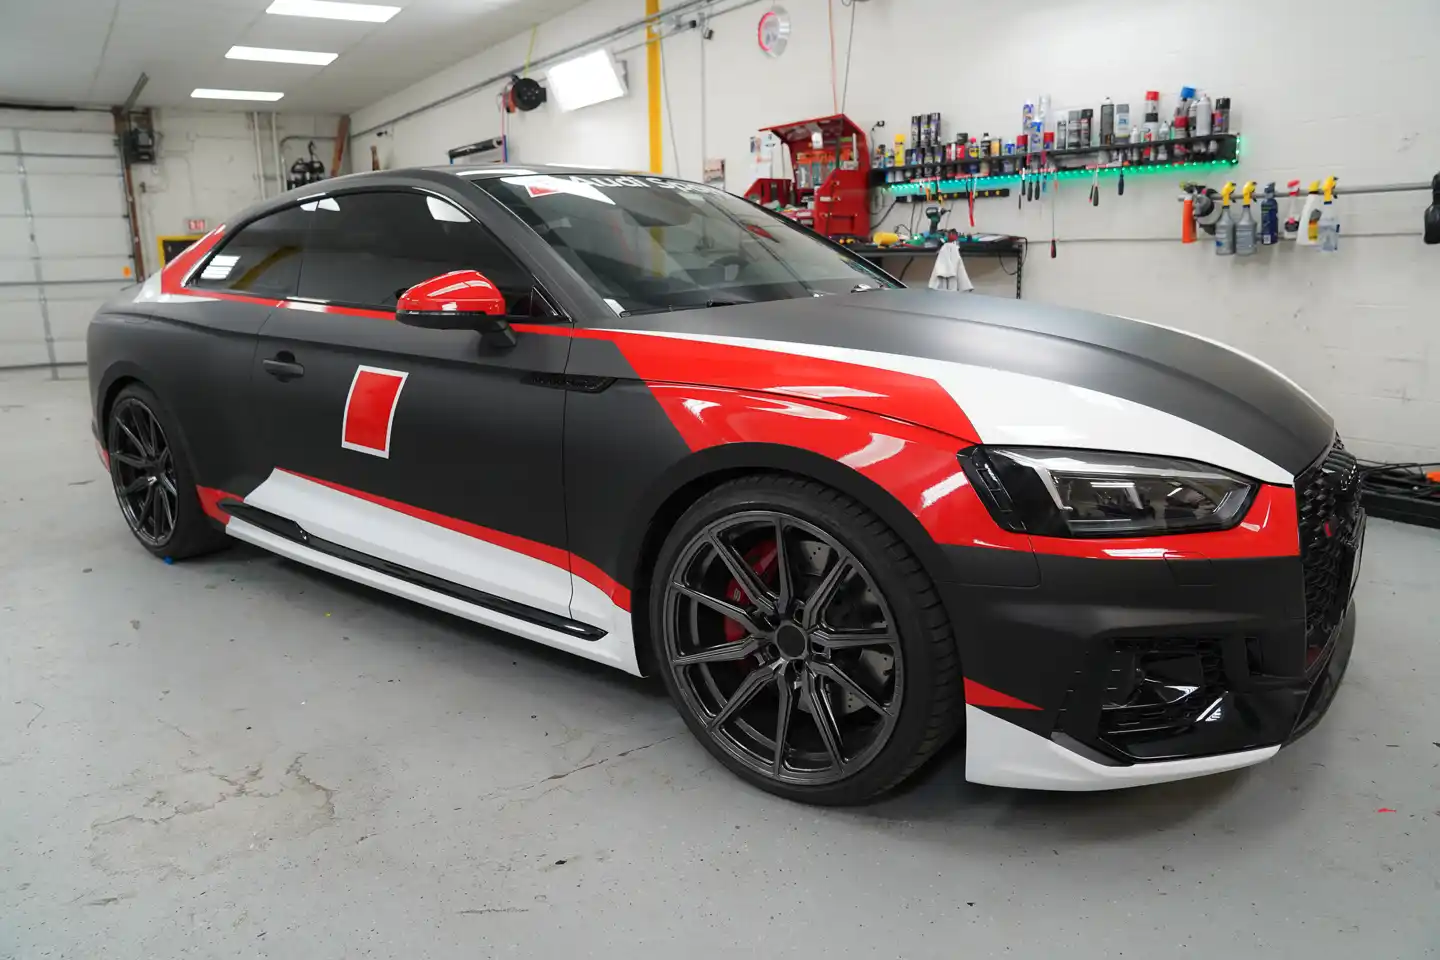 Need Race Car Vinyl Wrap? Get it at Tinting Chicago!